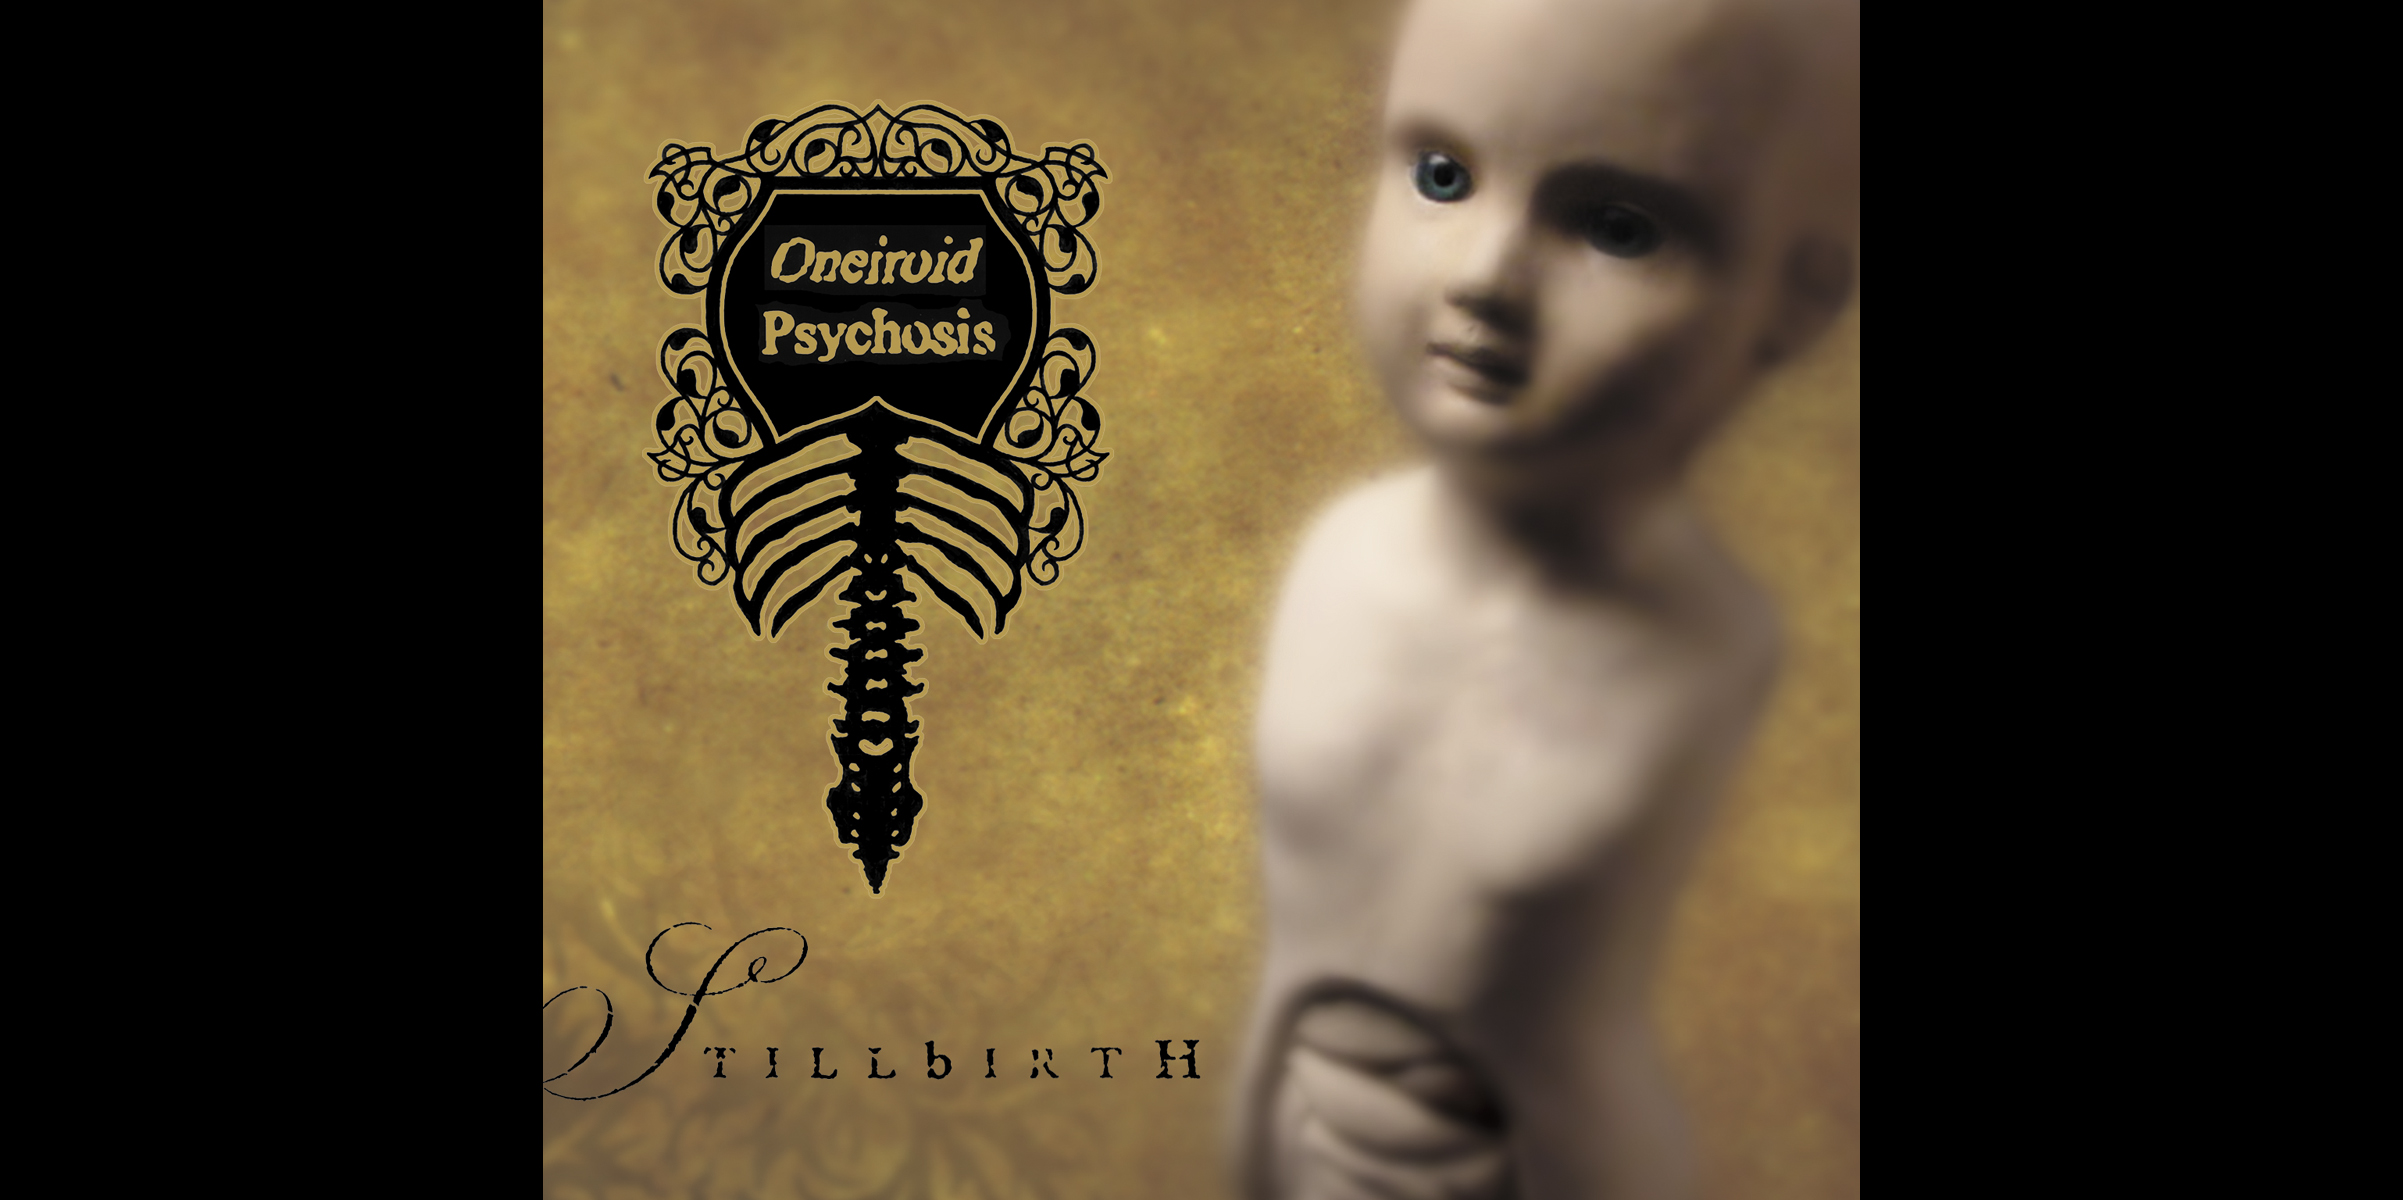   Oneiroid Psychosis,  Stillbirth  reissue. Digipak cover . 2003. Sculpted clay doll, Photography, Pen and ink. Released by Cop International. 